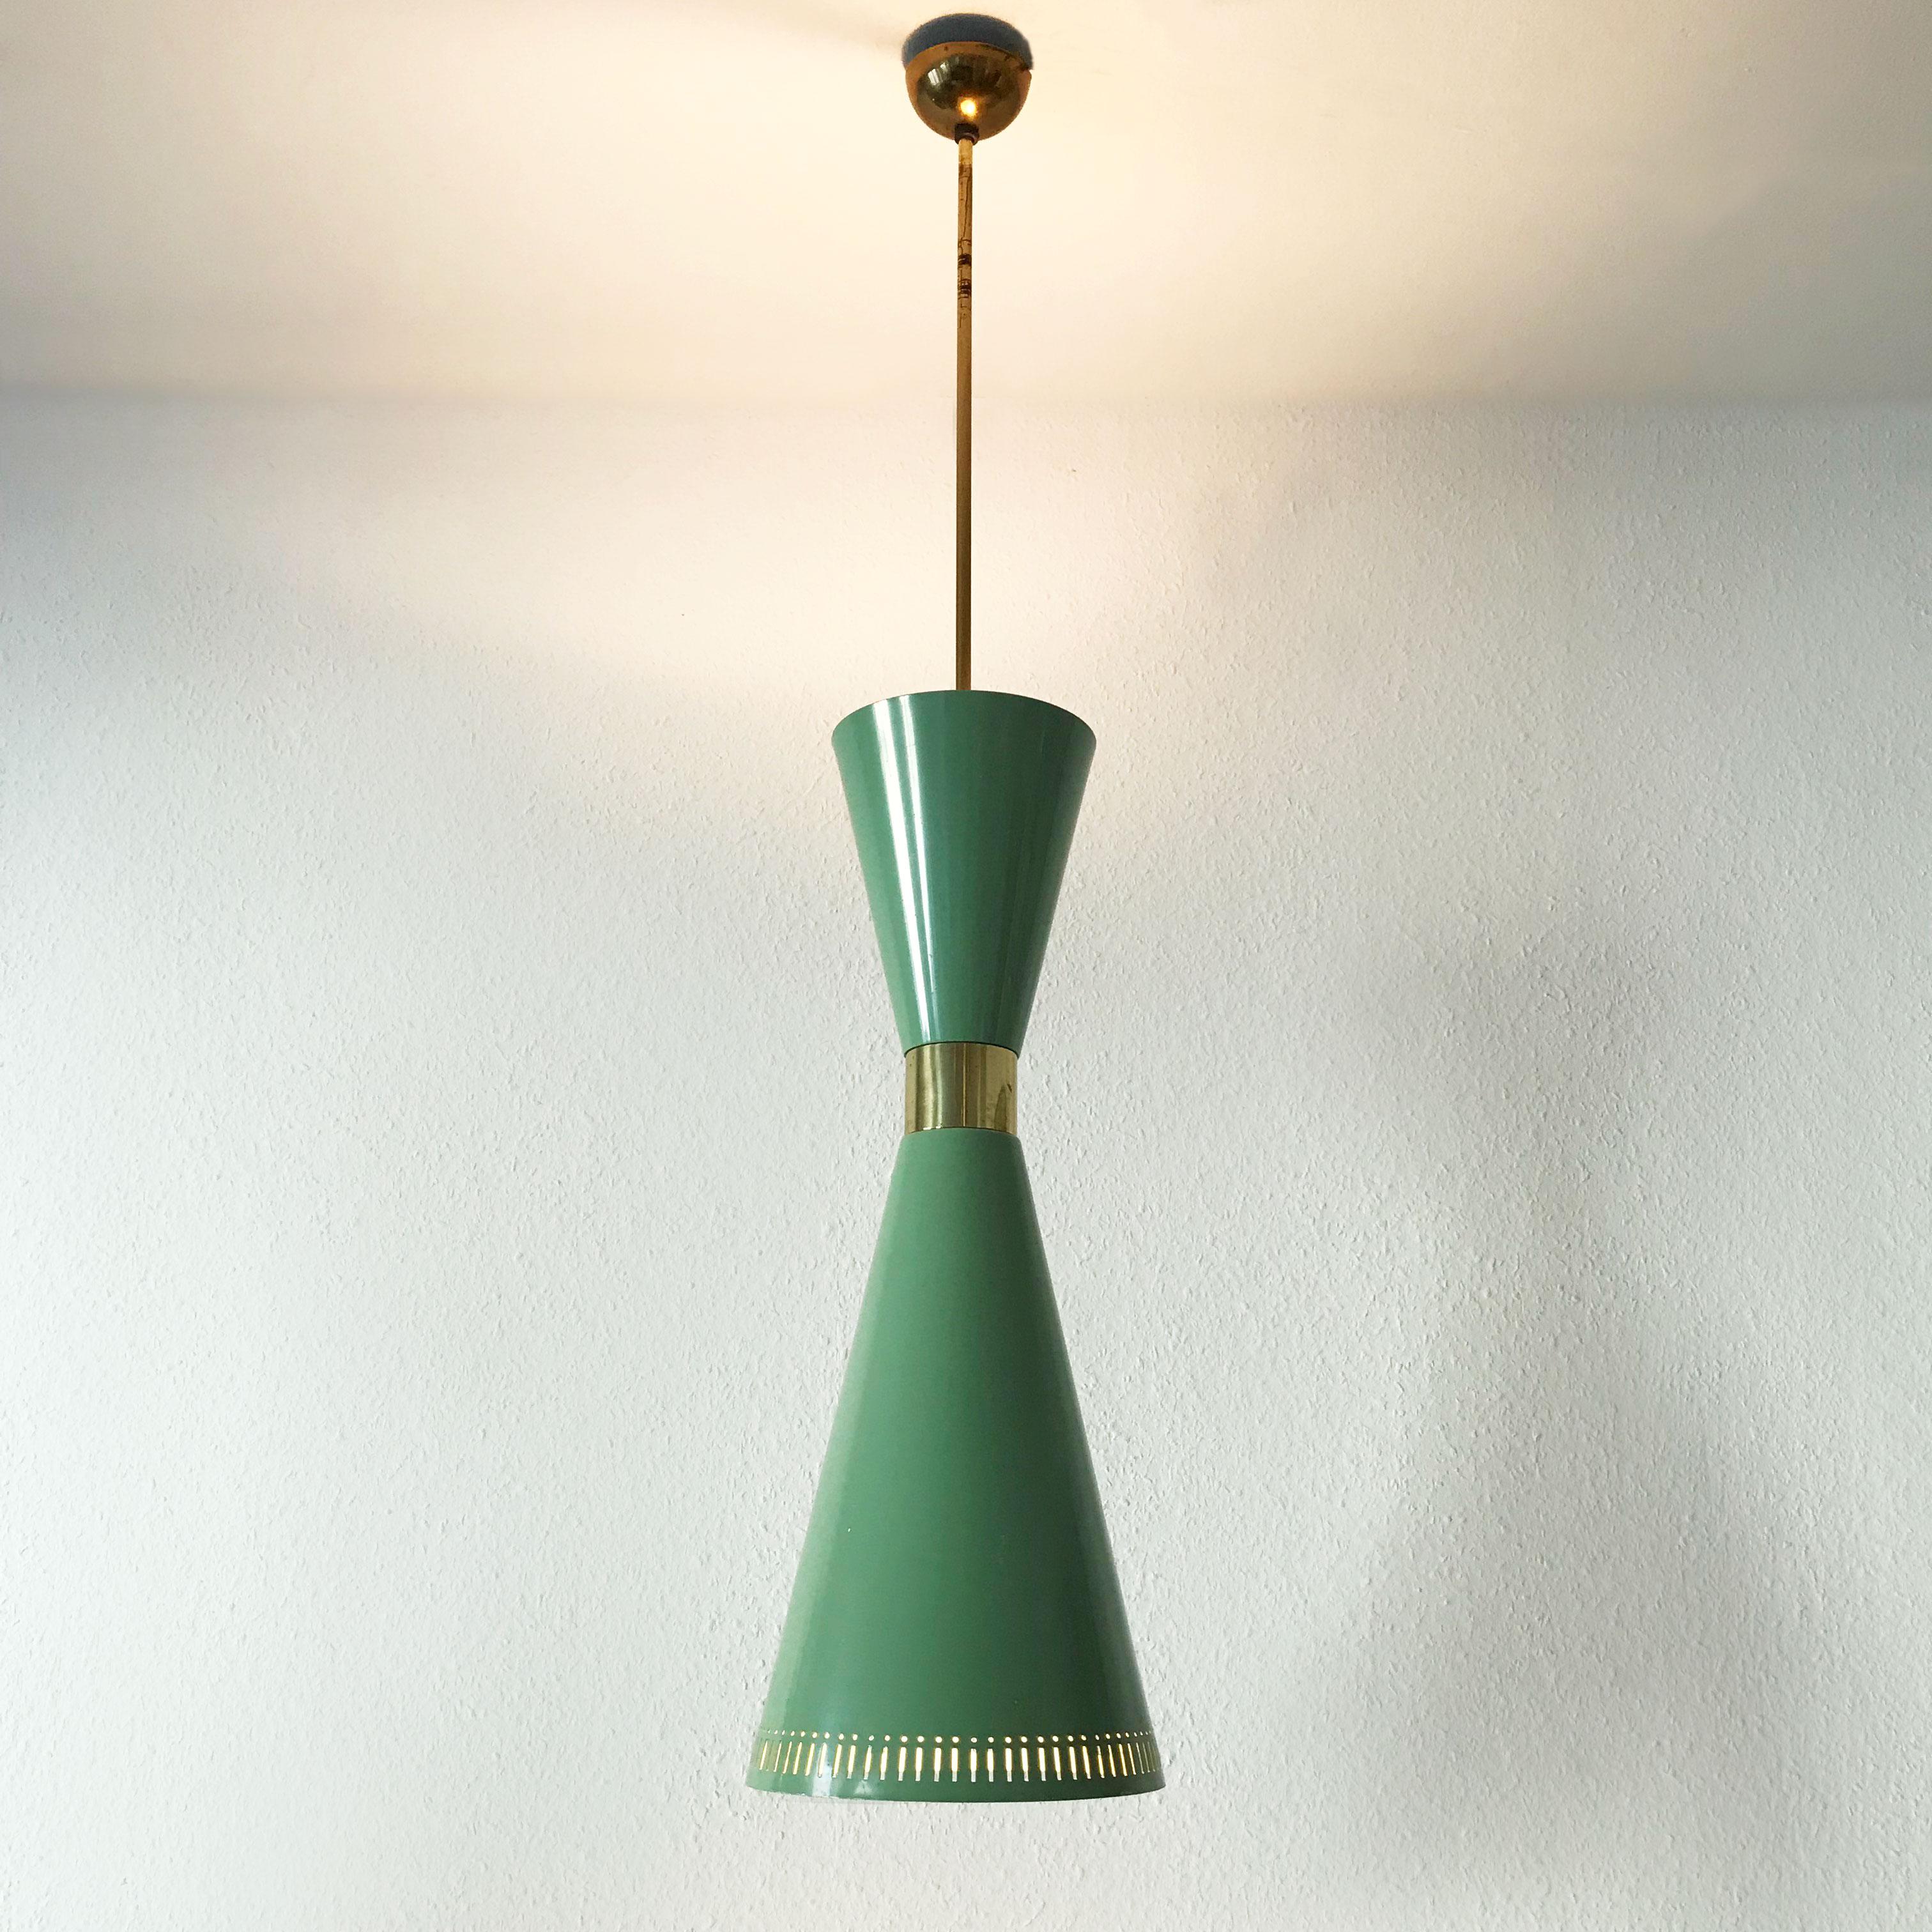 Exceptional Mid-Century Modern Large Diabolo Pendant Lamp by BAG Turgi, 1950s 6